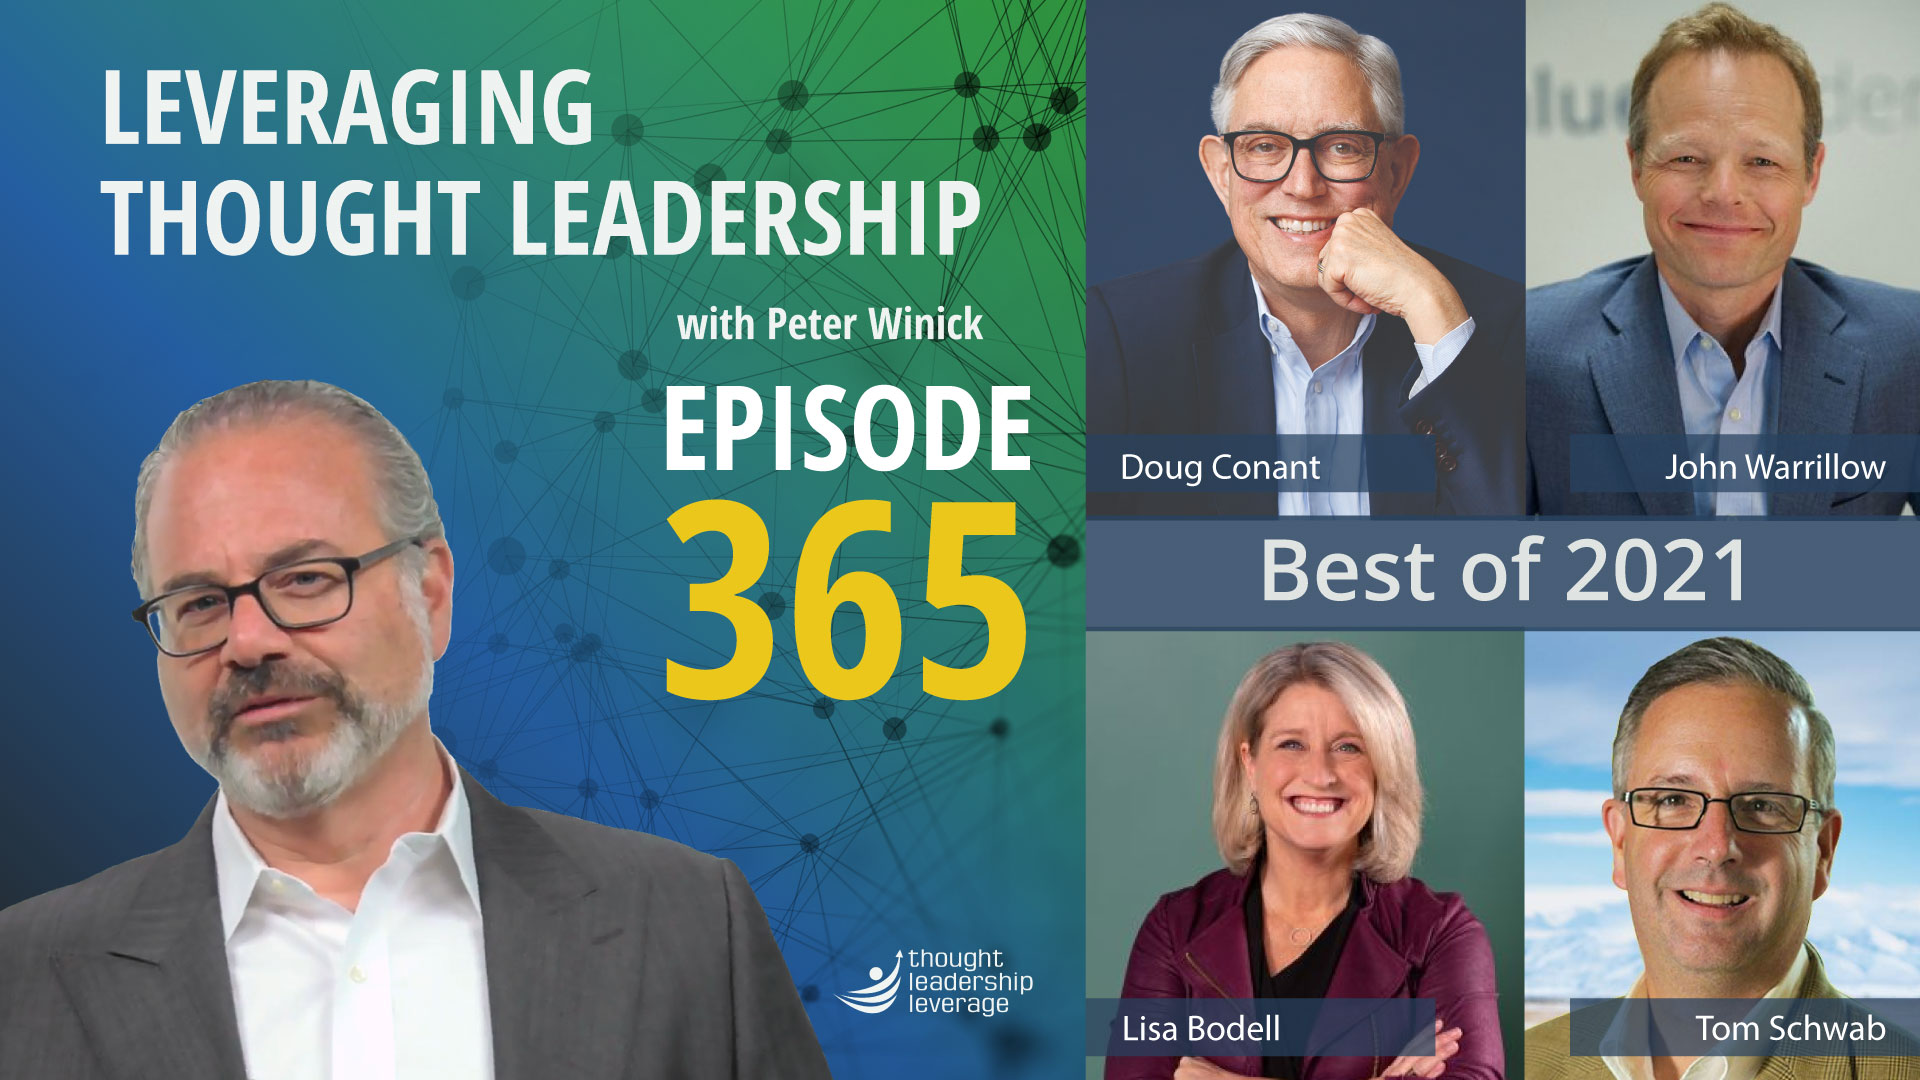 Best of 2021 | Thought Leadership Podcast Guests